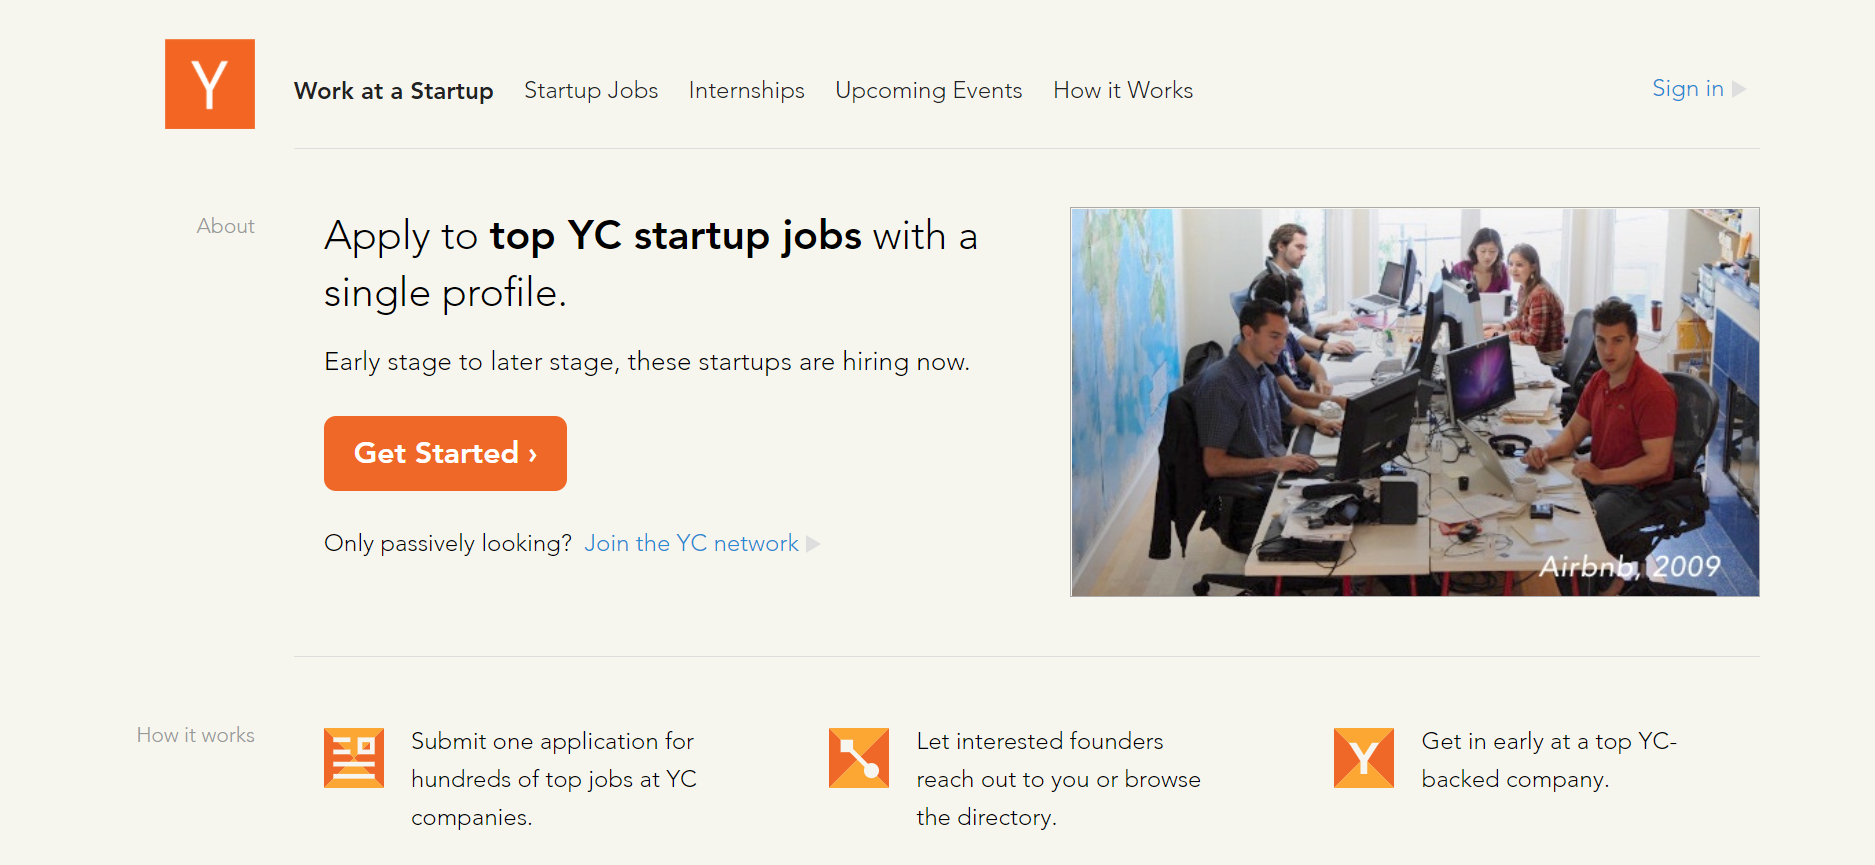 work at a startup homepage